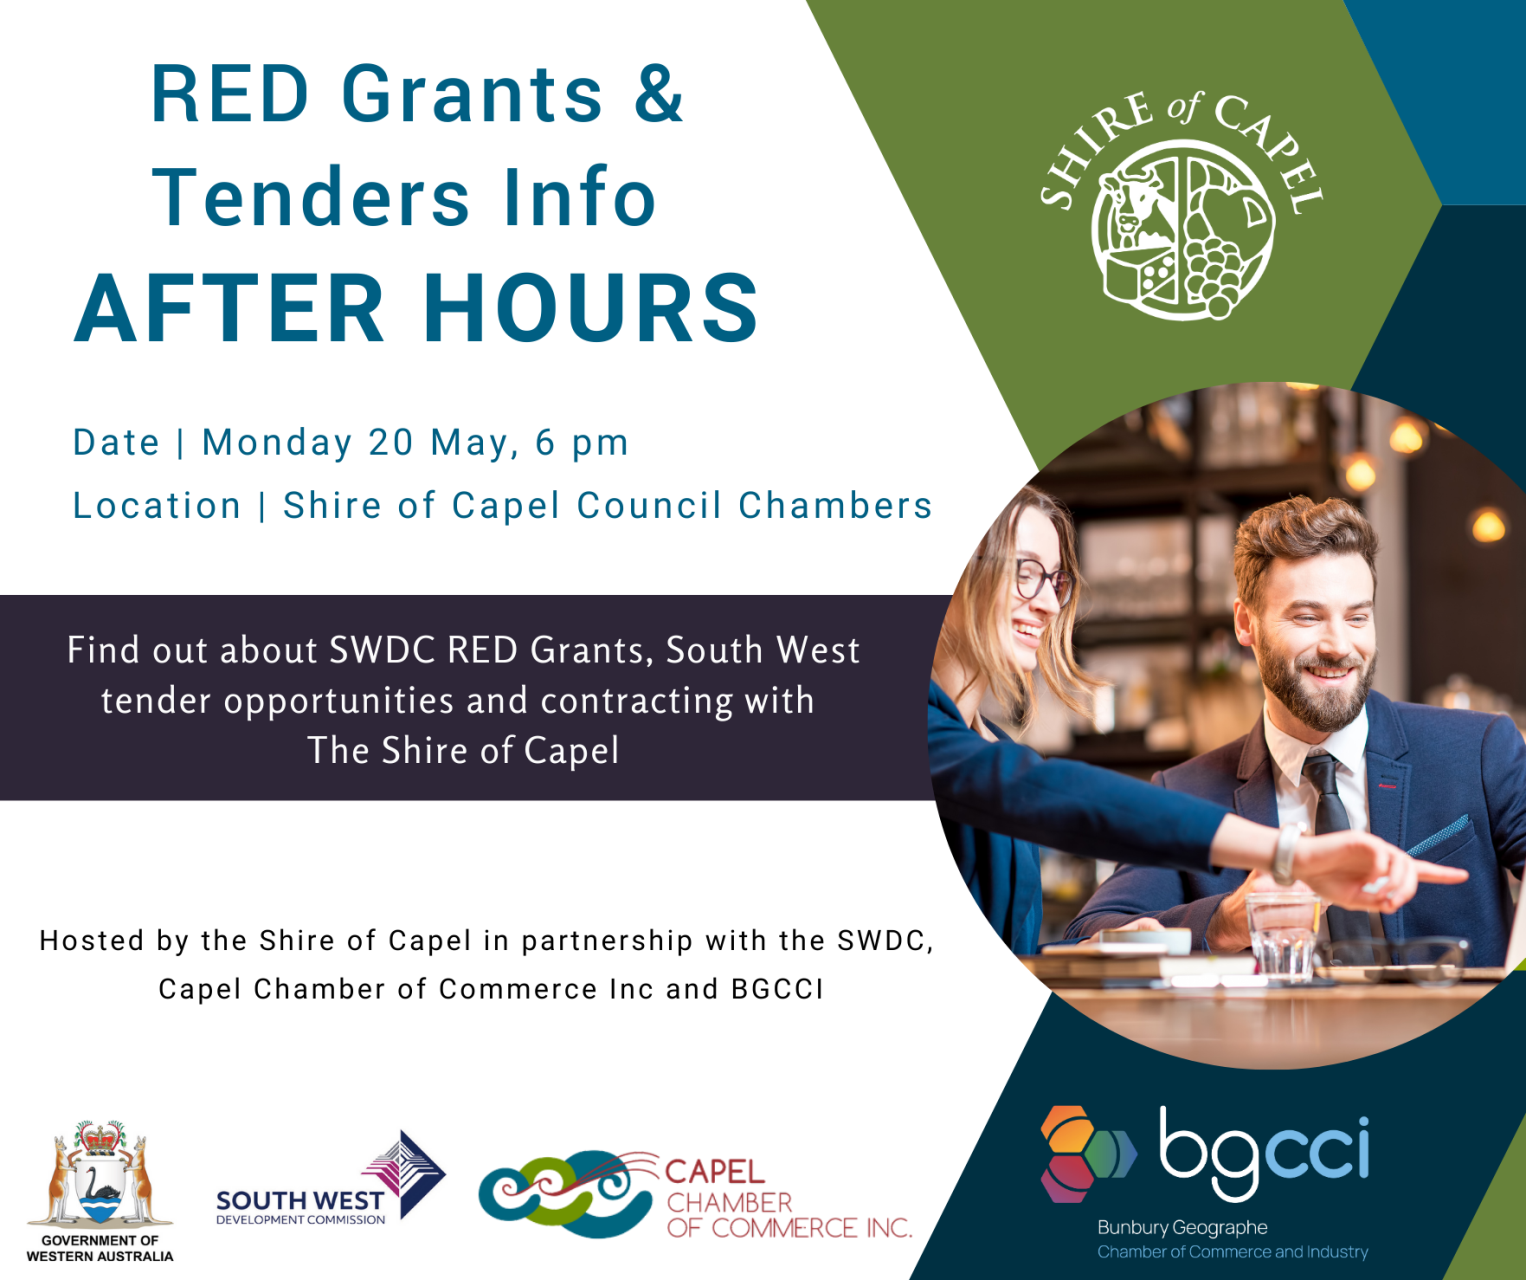 RED Grants & Tenders Info After Hours